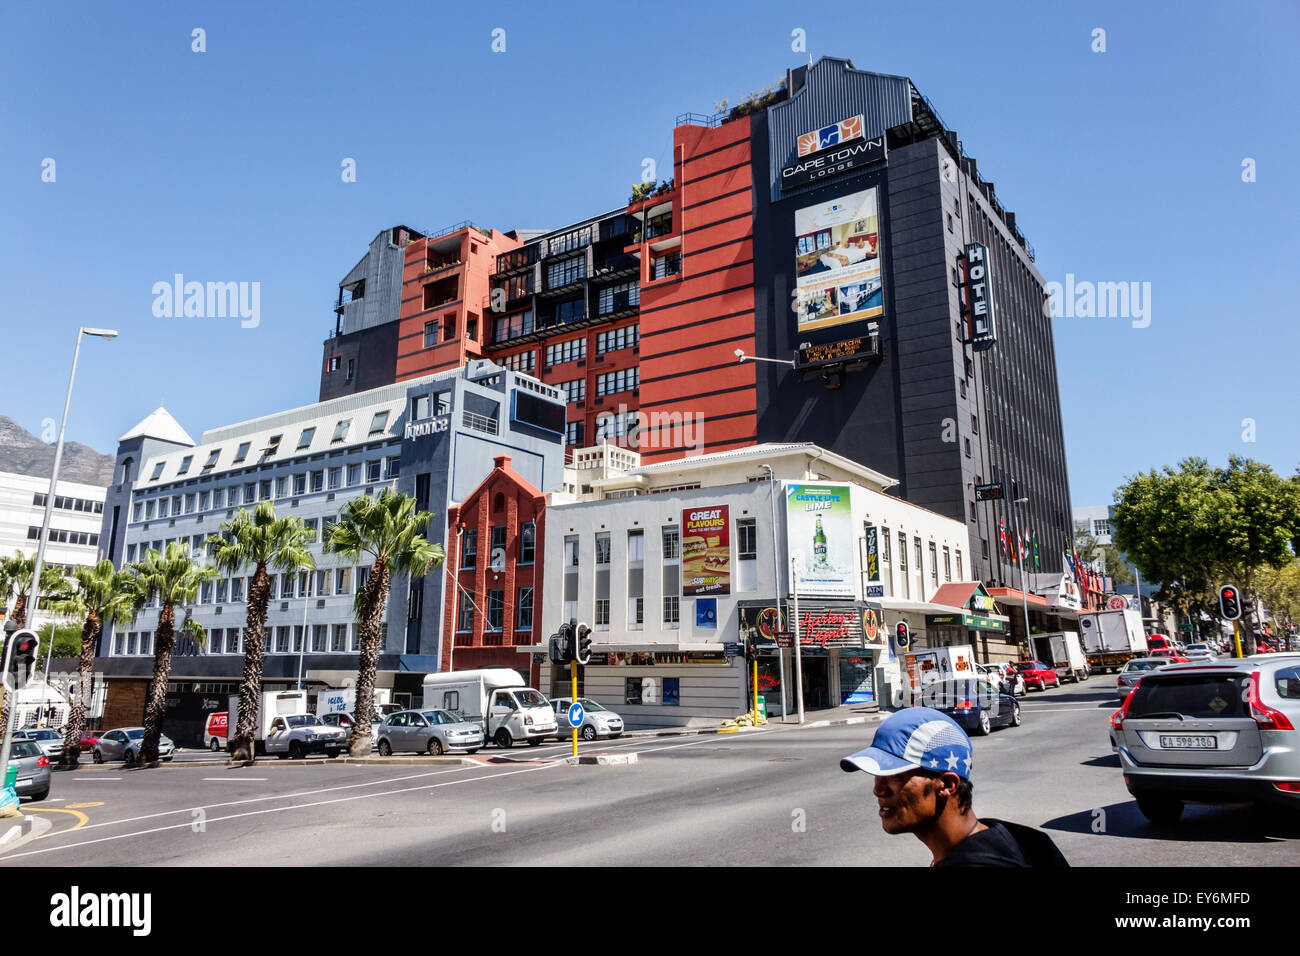 Cape Town South Africa,African,City Centre,center,Buitengracht Street,Wale,Cape Town Lodge,hotel hotels lodging inn motel motels,traffic,visitors trav Stock Photo